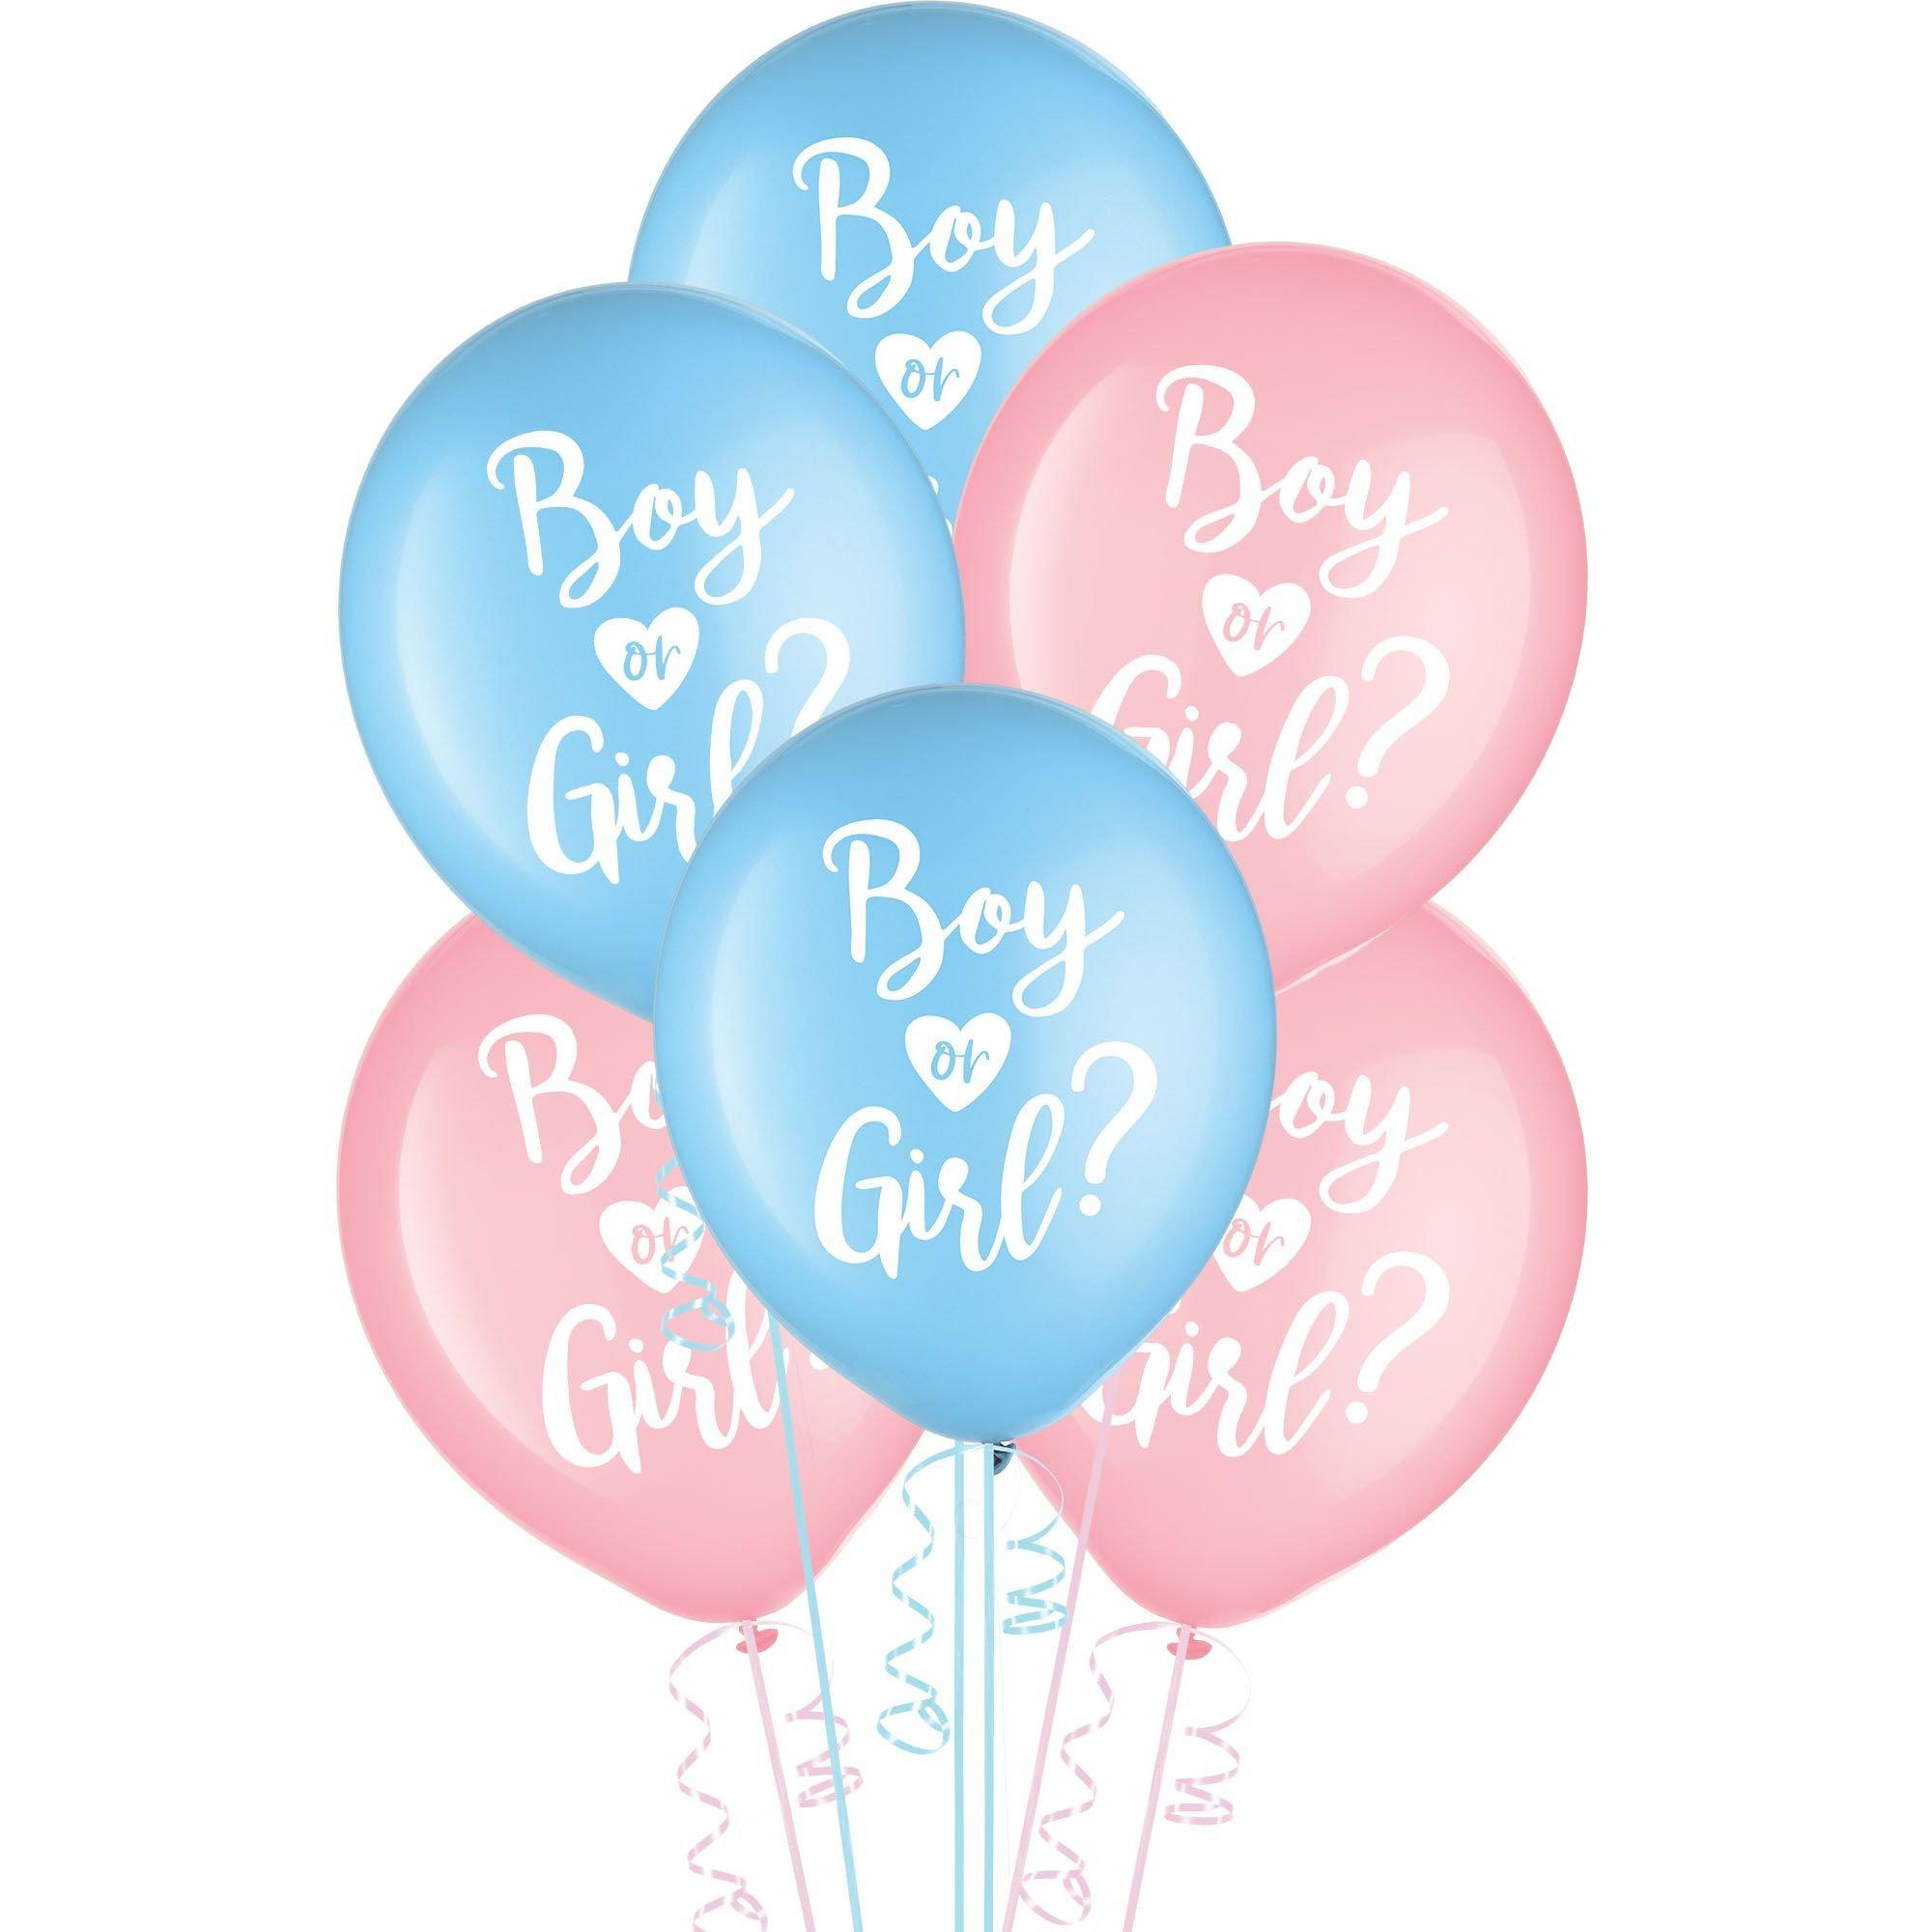 Gender Reveal Party In A Box, Baby Shower Balloon Decorations, Pink Blue  Girl Boy Gender Reveal Party Decorations, What Will Baby Be?